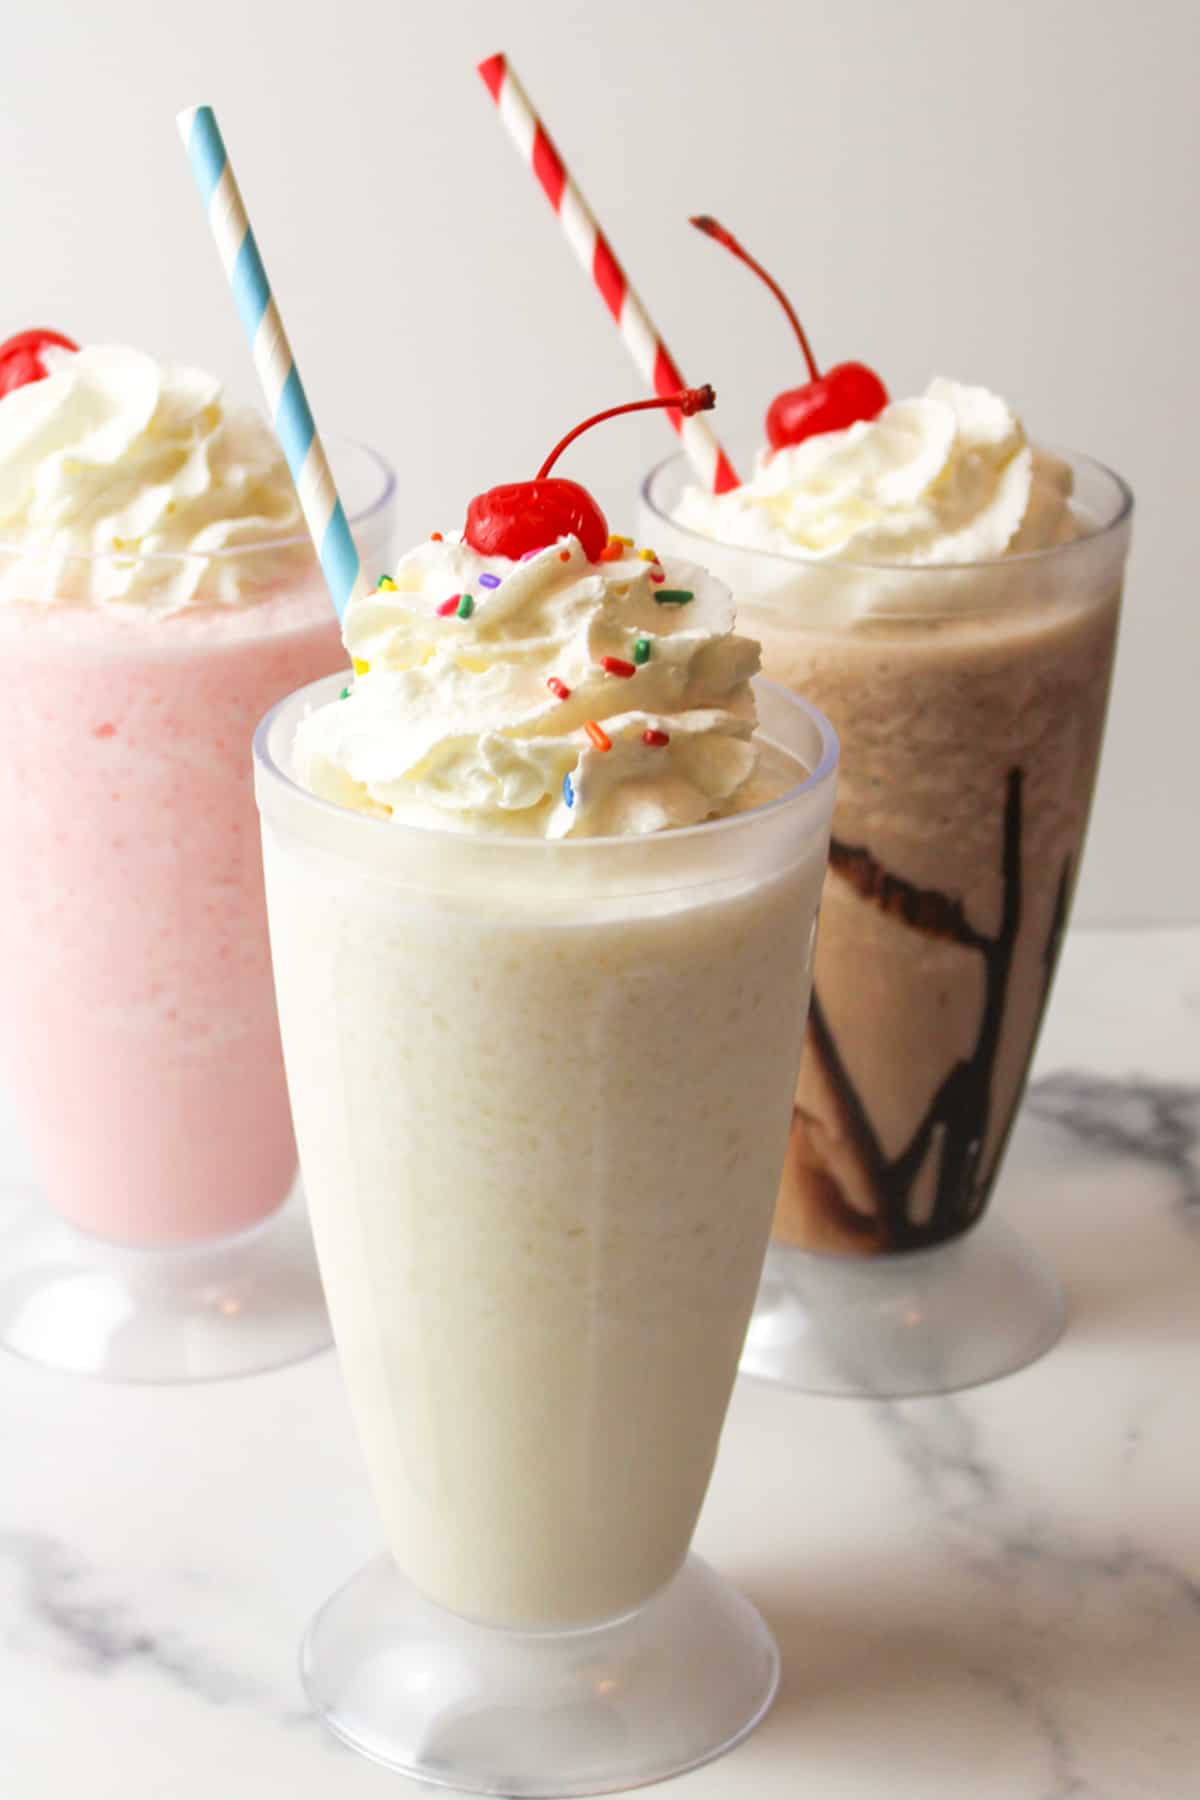 three milkshakes made without ice cream and topped with whipped cream and cherries and given a striped straw.